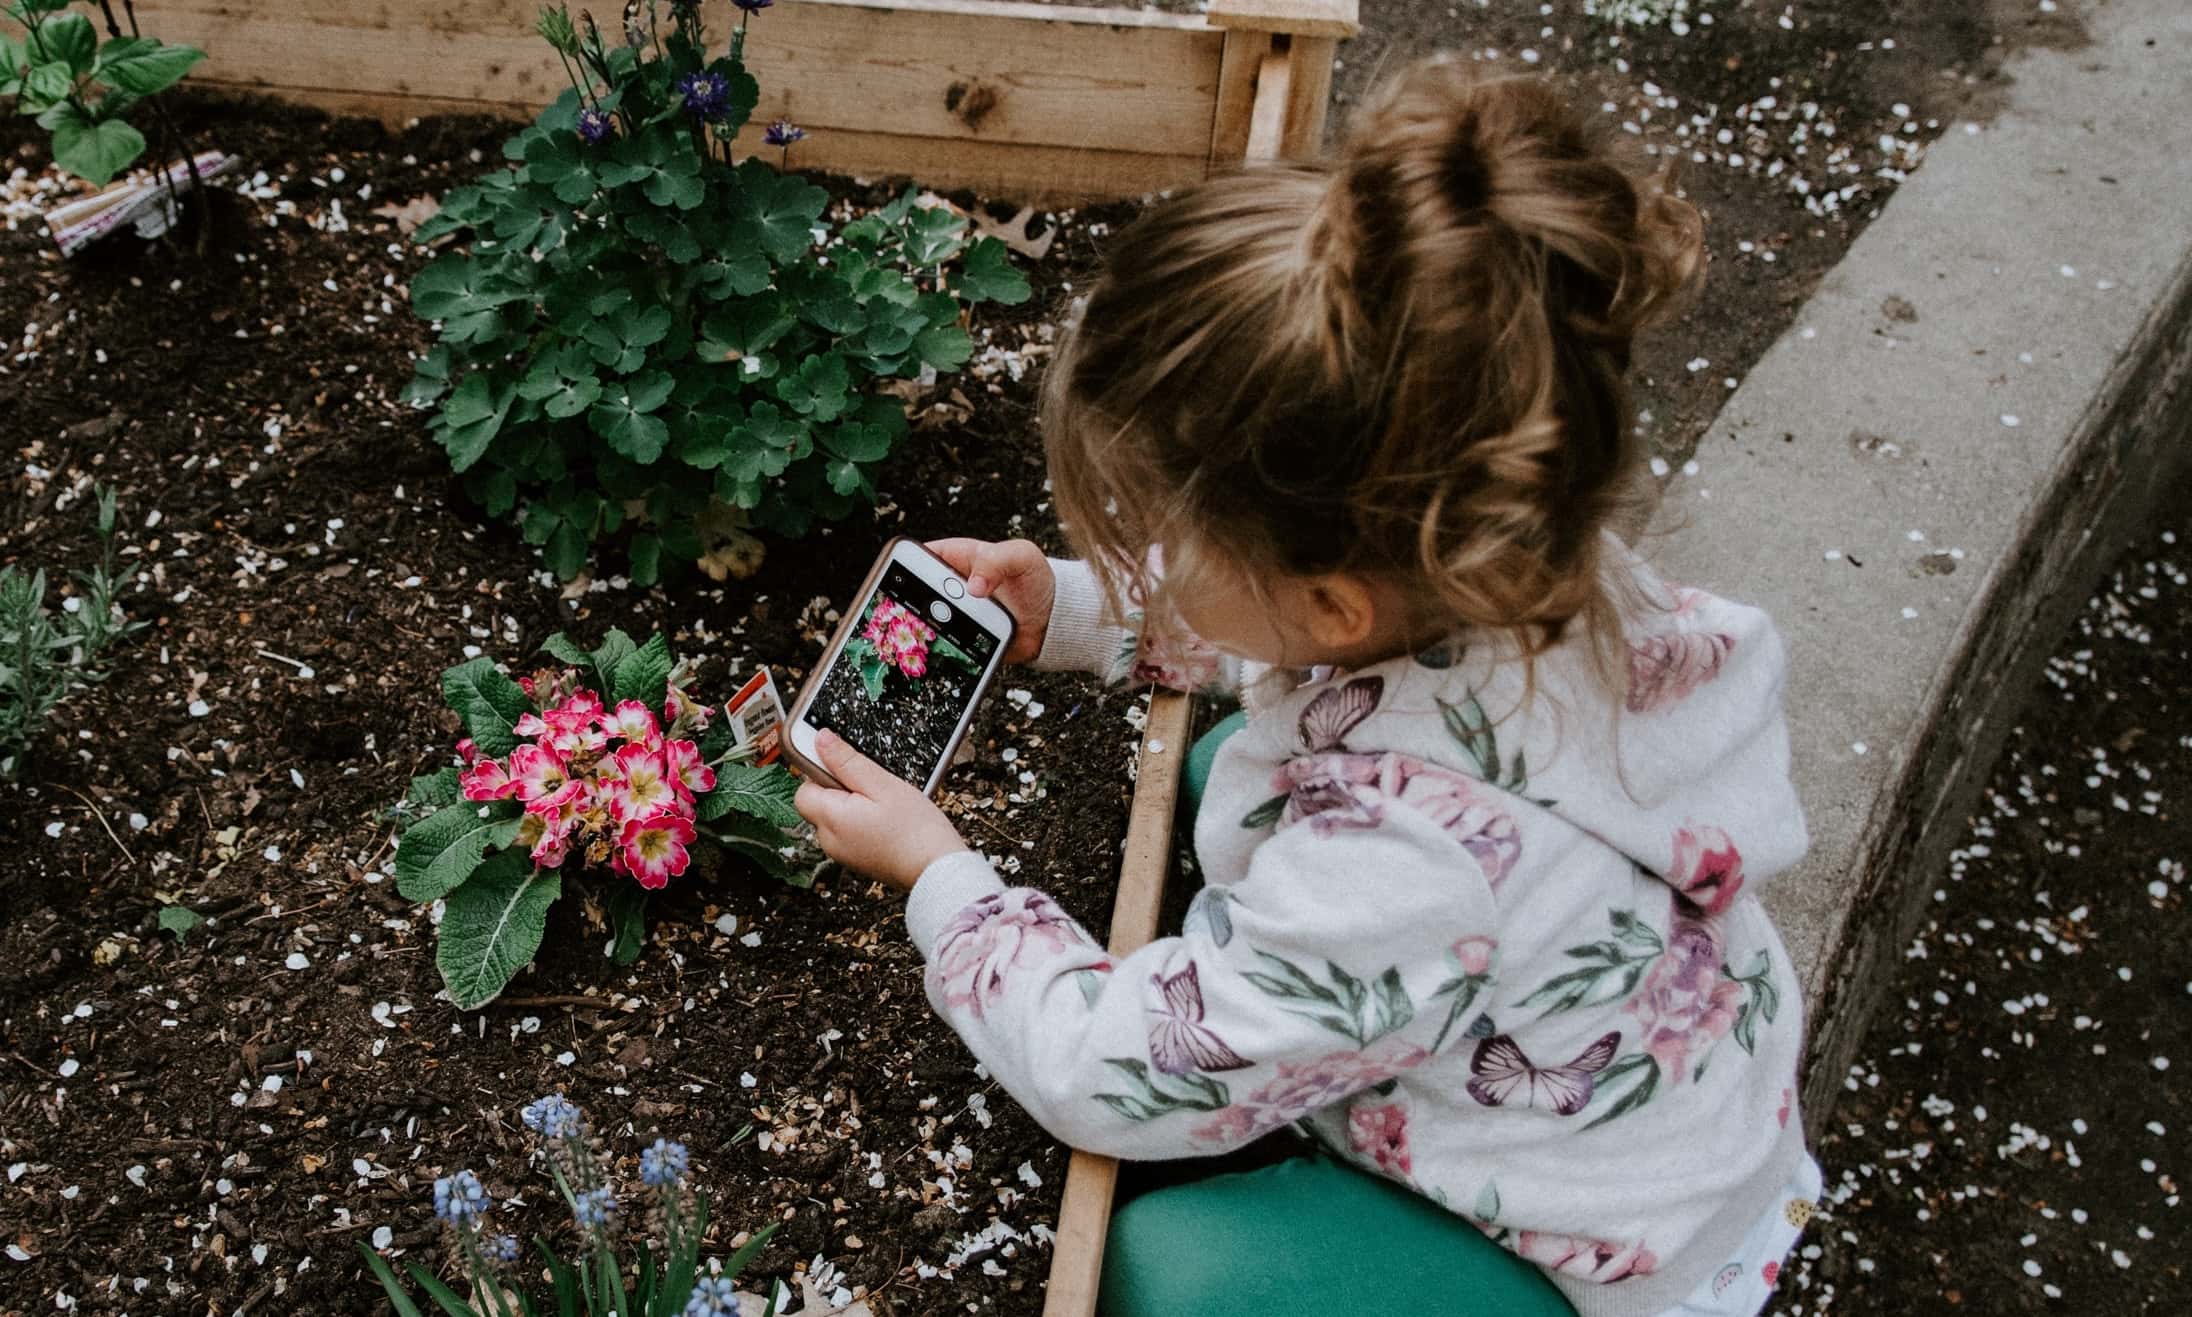 Child taking a picture of flower using iPhone